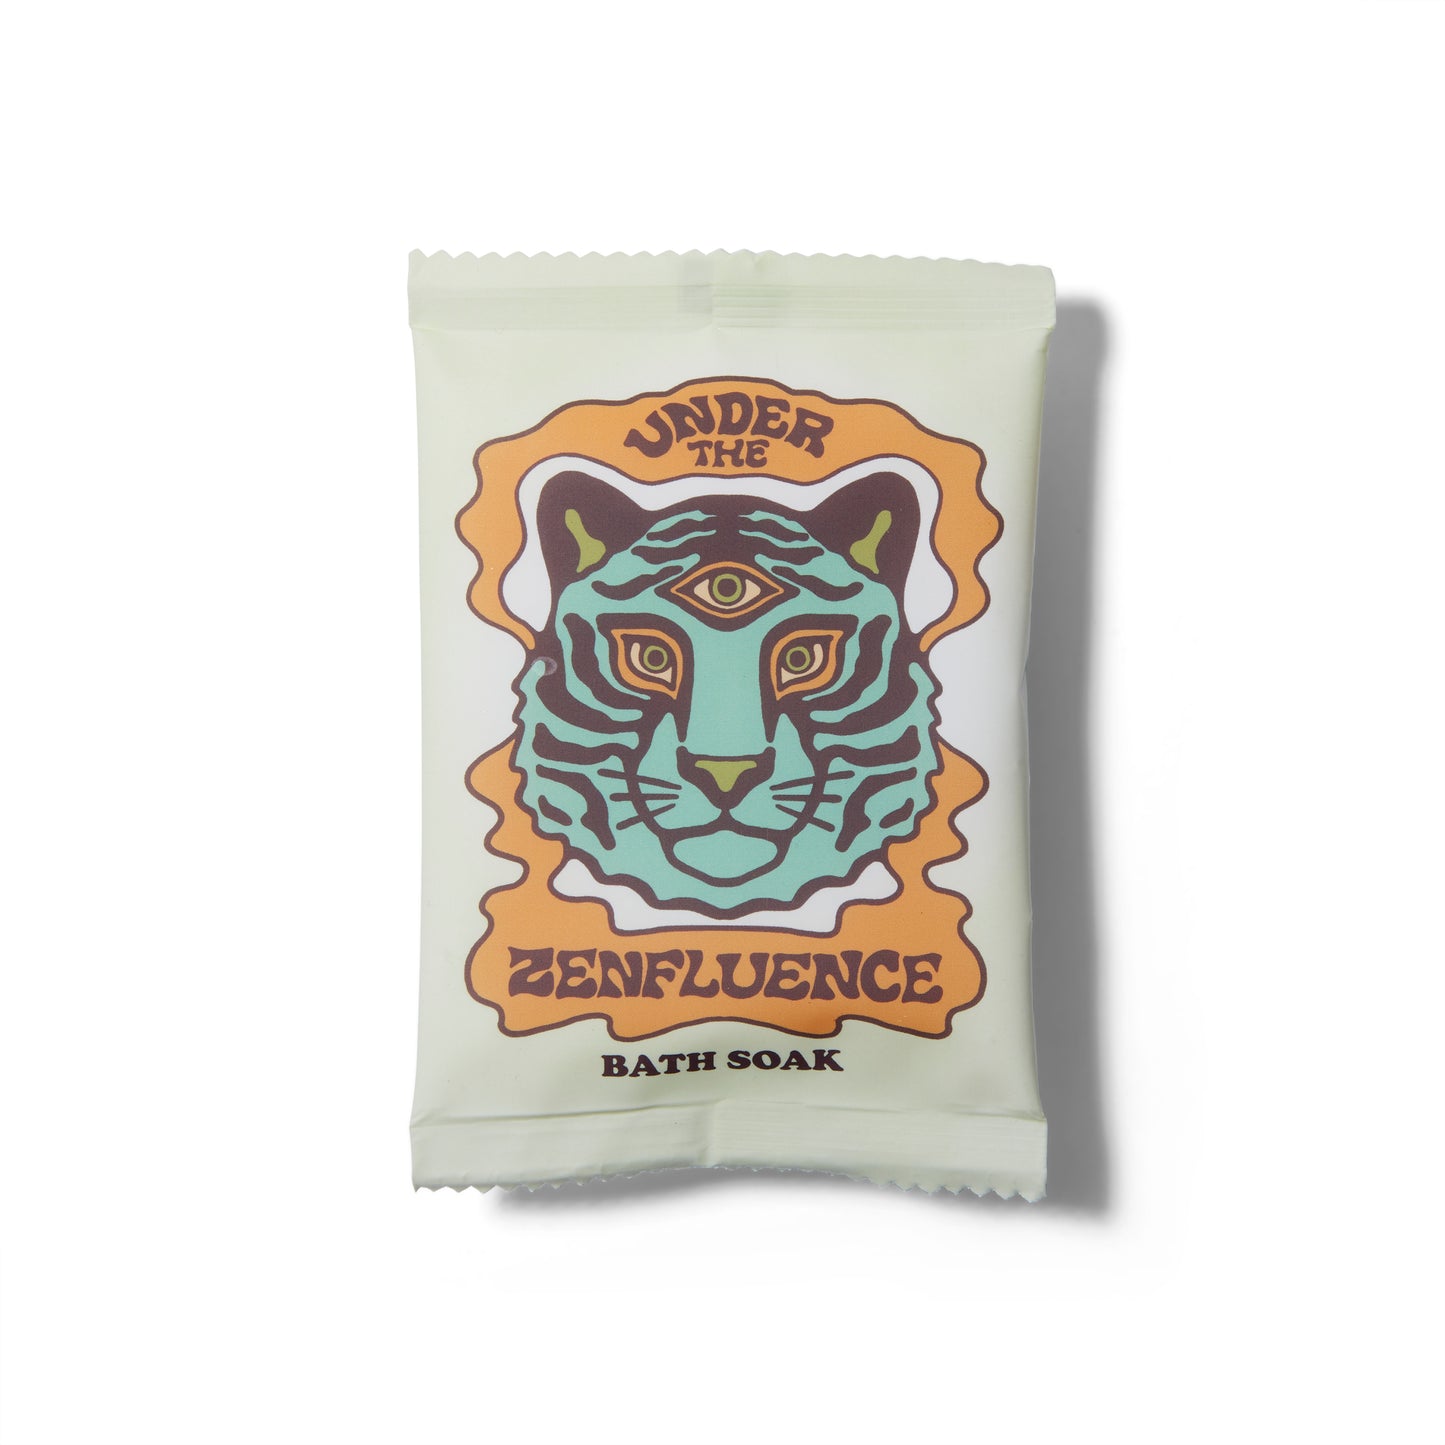 The Wild Yonder Organic Bath Salts in Under The Zenfluence. There is an illustration of a three eyed tiger on the package. 